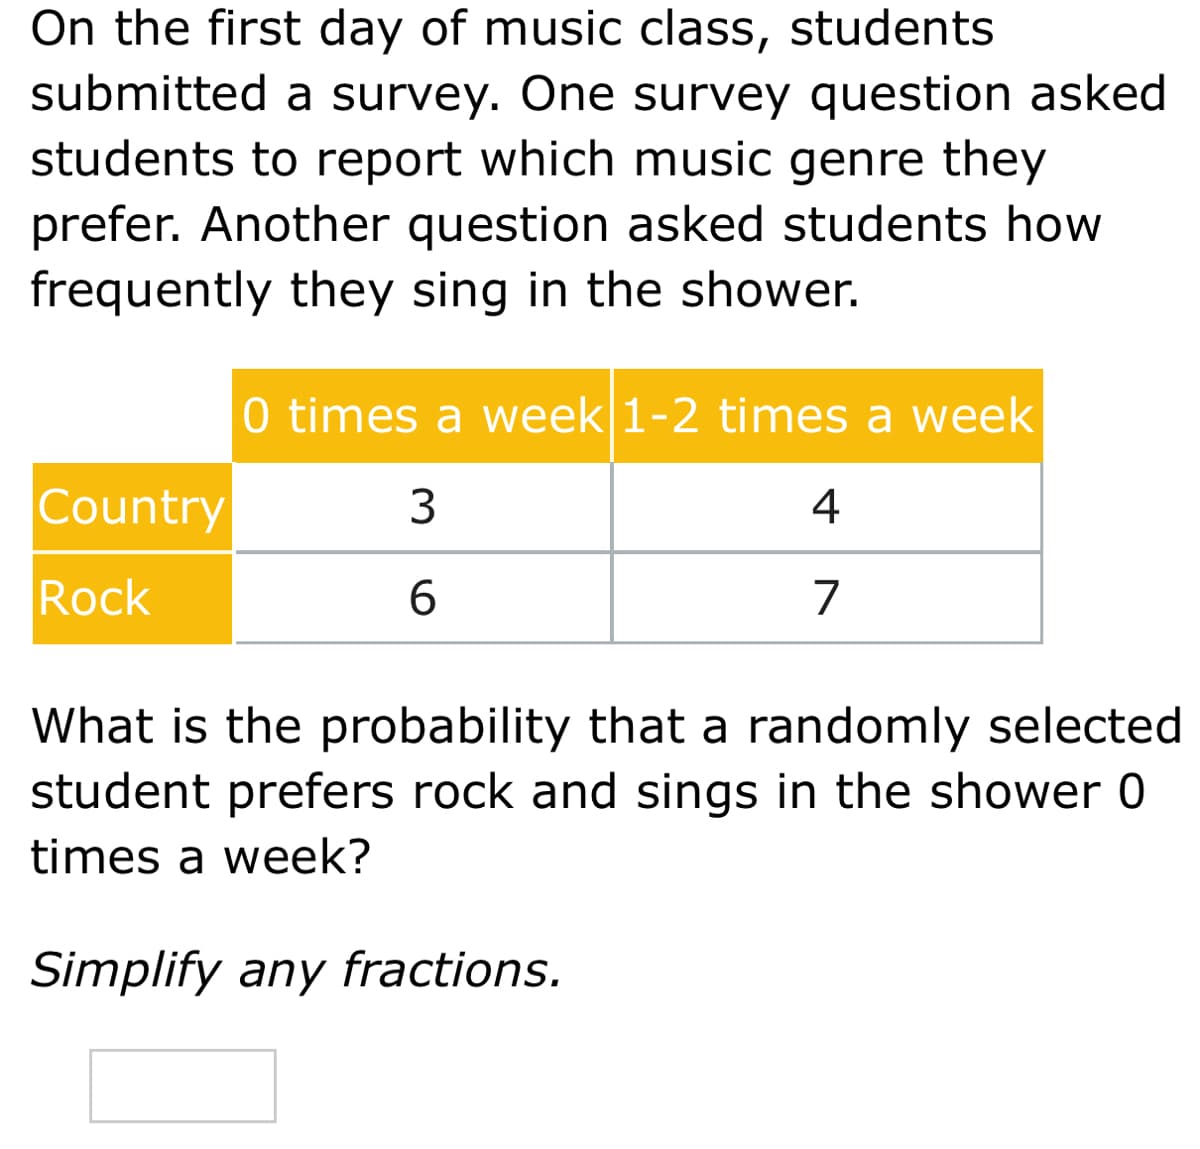 On the first day of music class, students
submitted a survey. One survey question asked
students to report which music genre they
prefer. Another question asked students how
frequently they sing in the shower.
0 times a week 1-2 times a week
Country
4
Rock
6.
7
What is the probability that a randomly selected
student prefers rock and sings in the shower 0
times a week?
Simplify any fractions.
